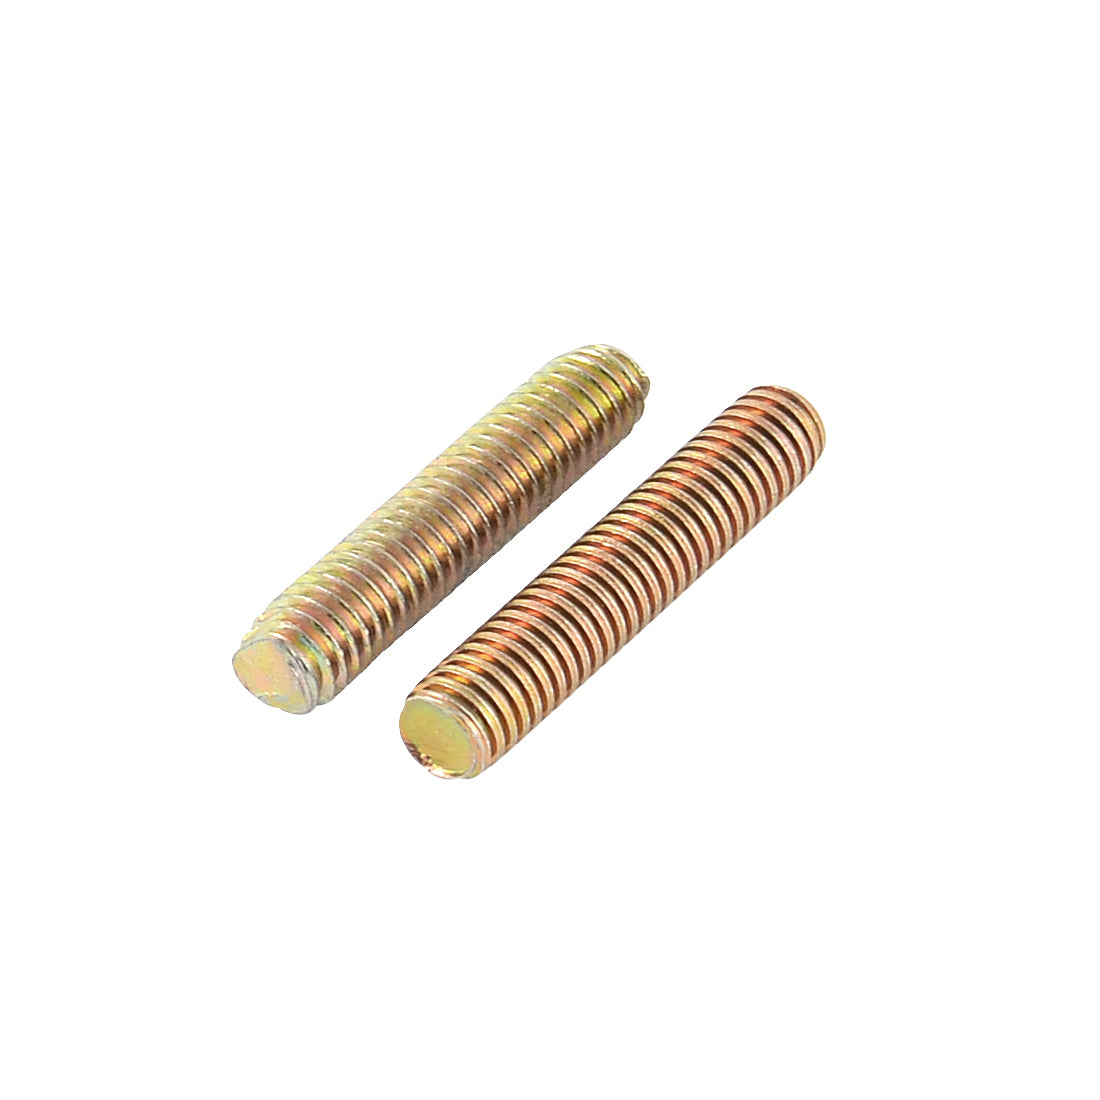 uxcell Uxcell 1mm Pitch M6 x 30mm Male Threaded Rod Bar Stud Bronze Tone 10 Pcs